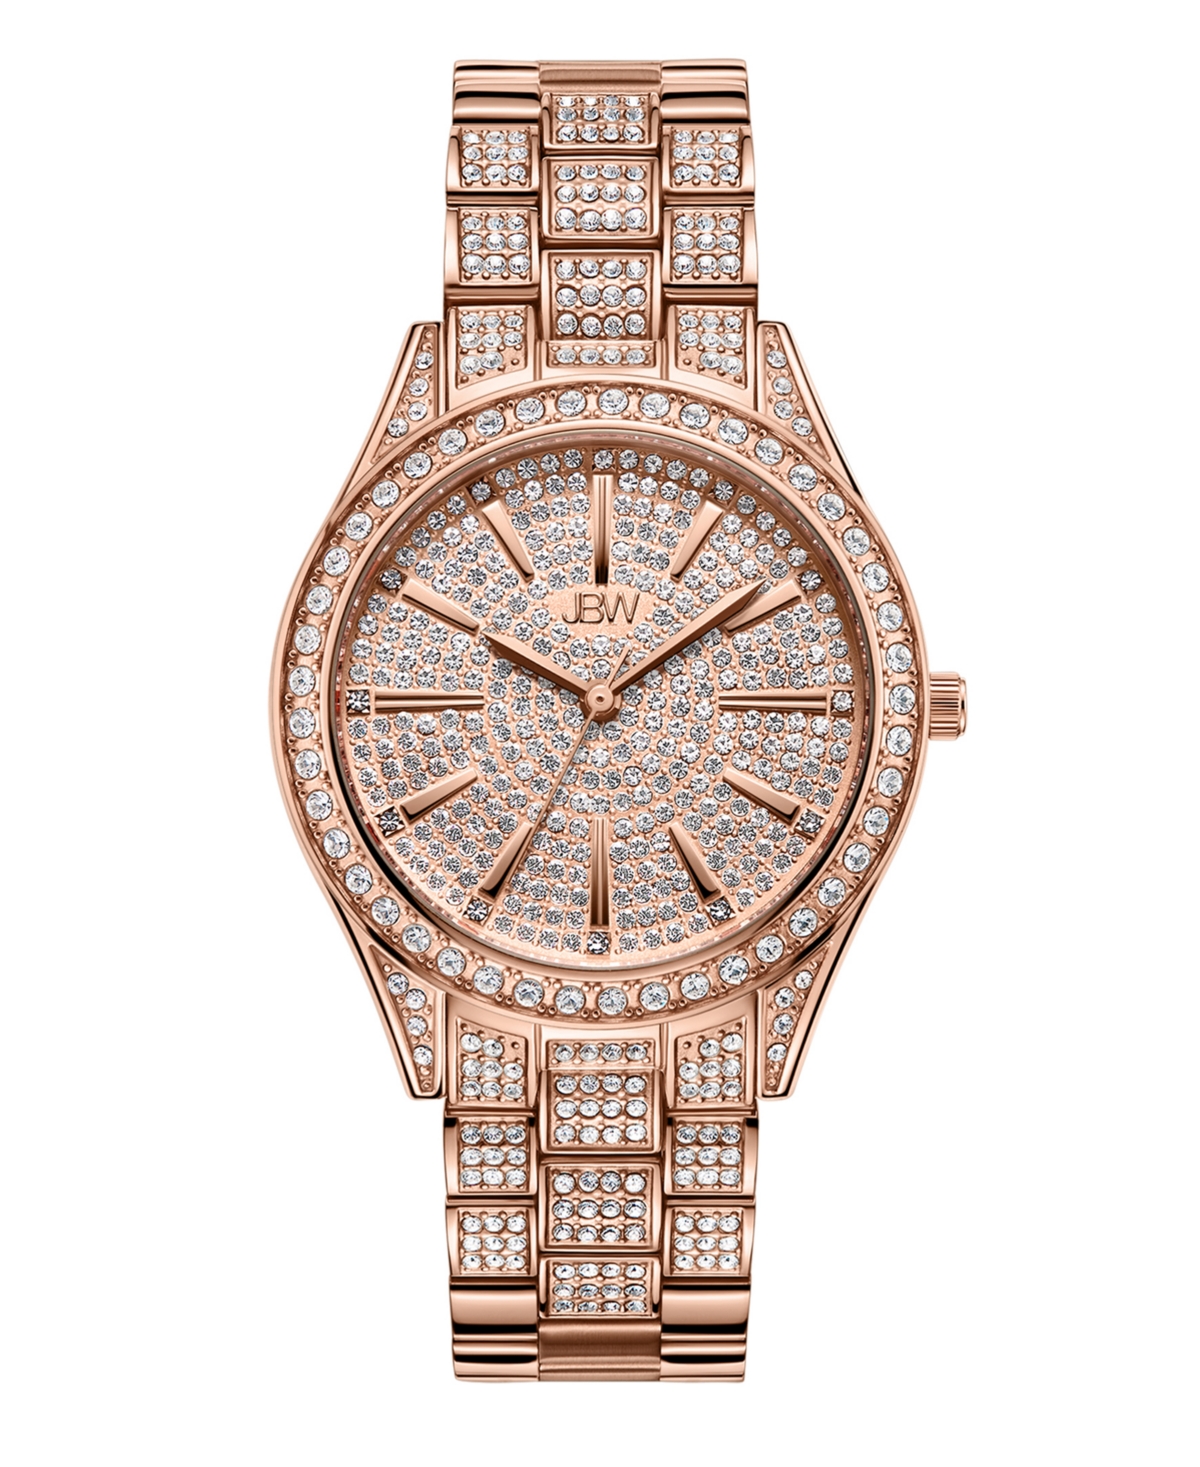 Women's Cristal Diamond (1/8 ct. t.w.) Watch in 18k Rose Gold-plated Stainless-steel Watch 38mm - Gold